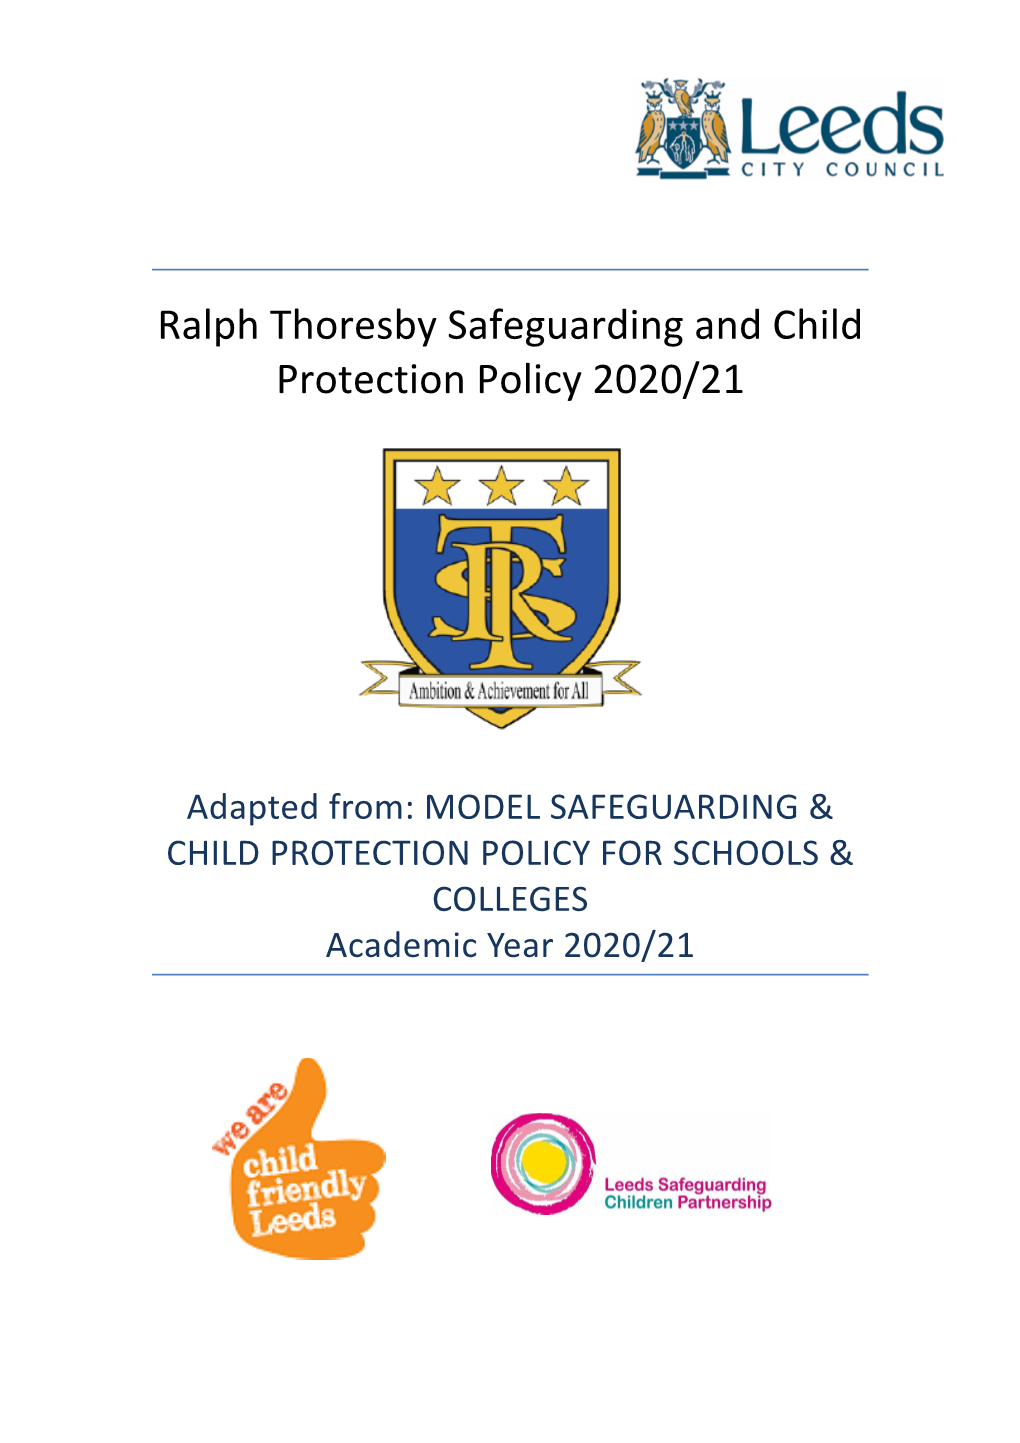 Ralph Thoresby Safeguarding and Child Protection Policy 2020/21